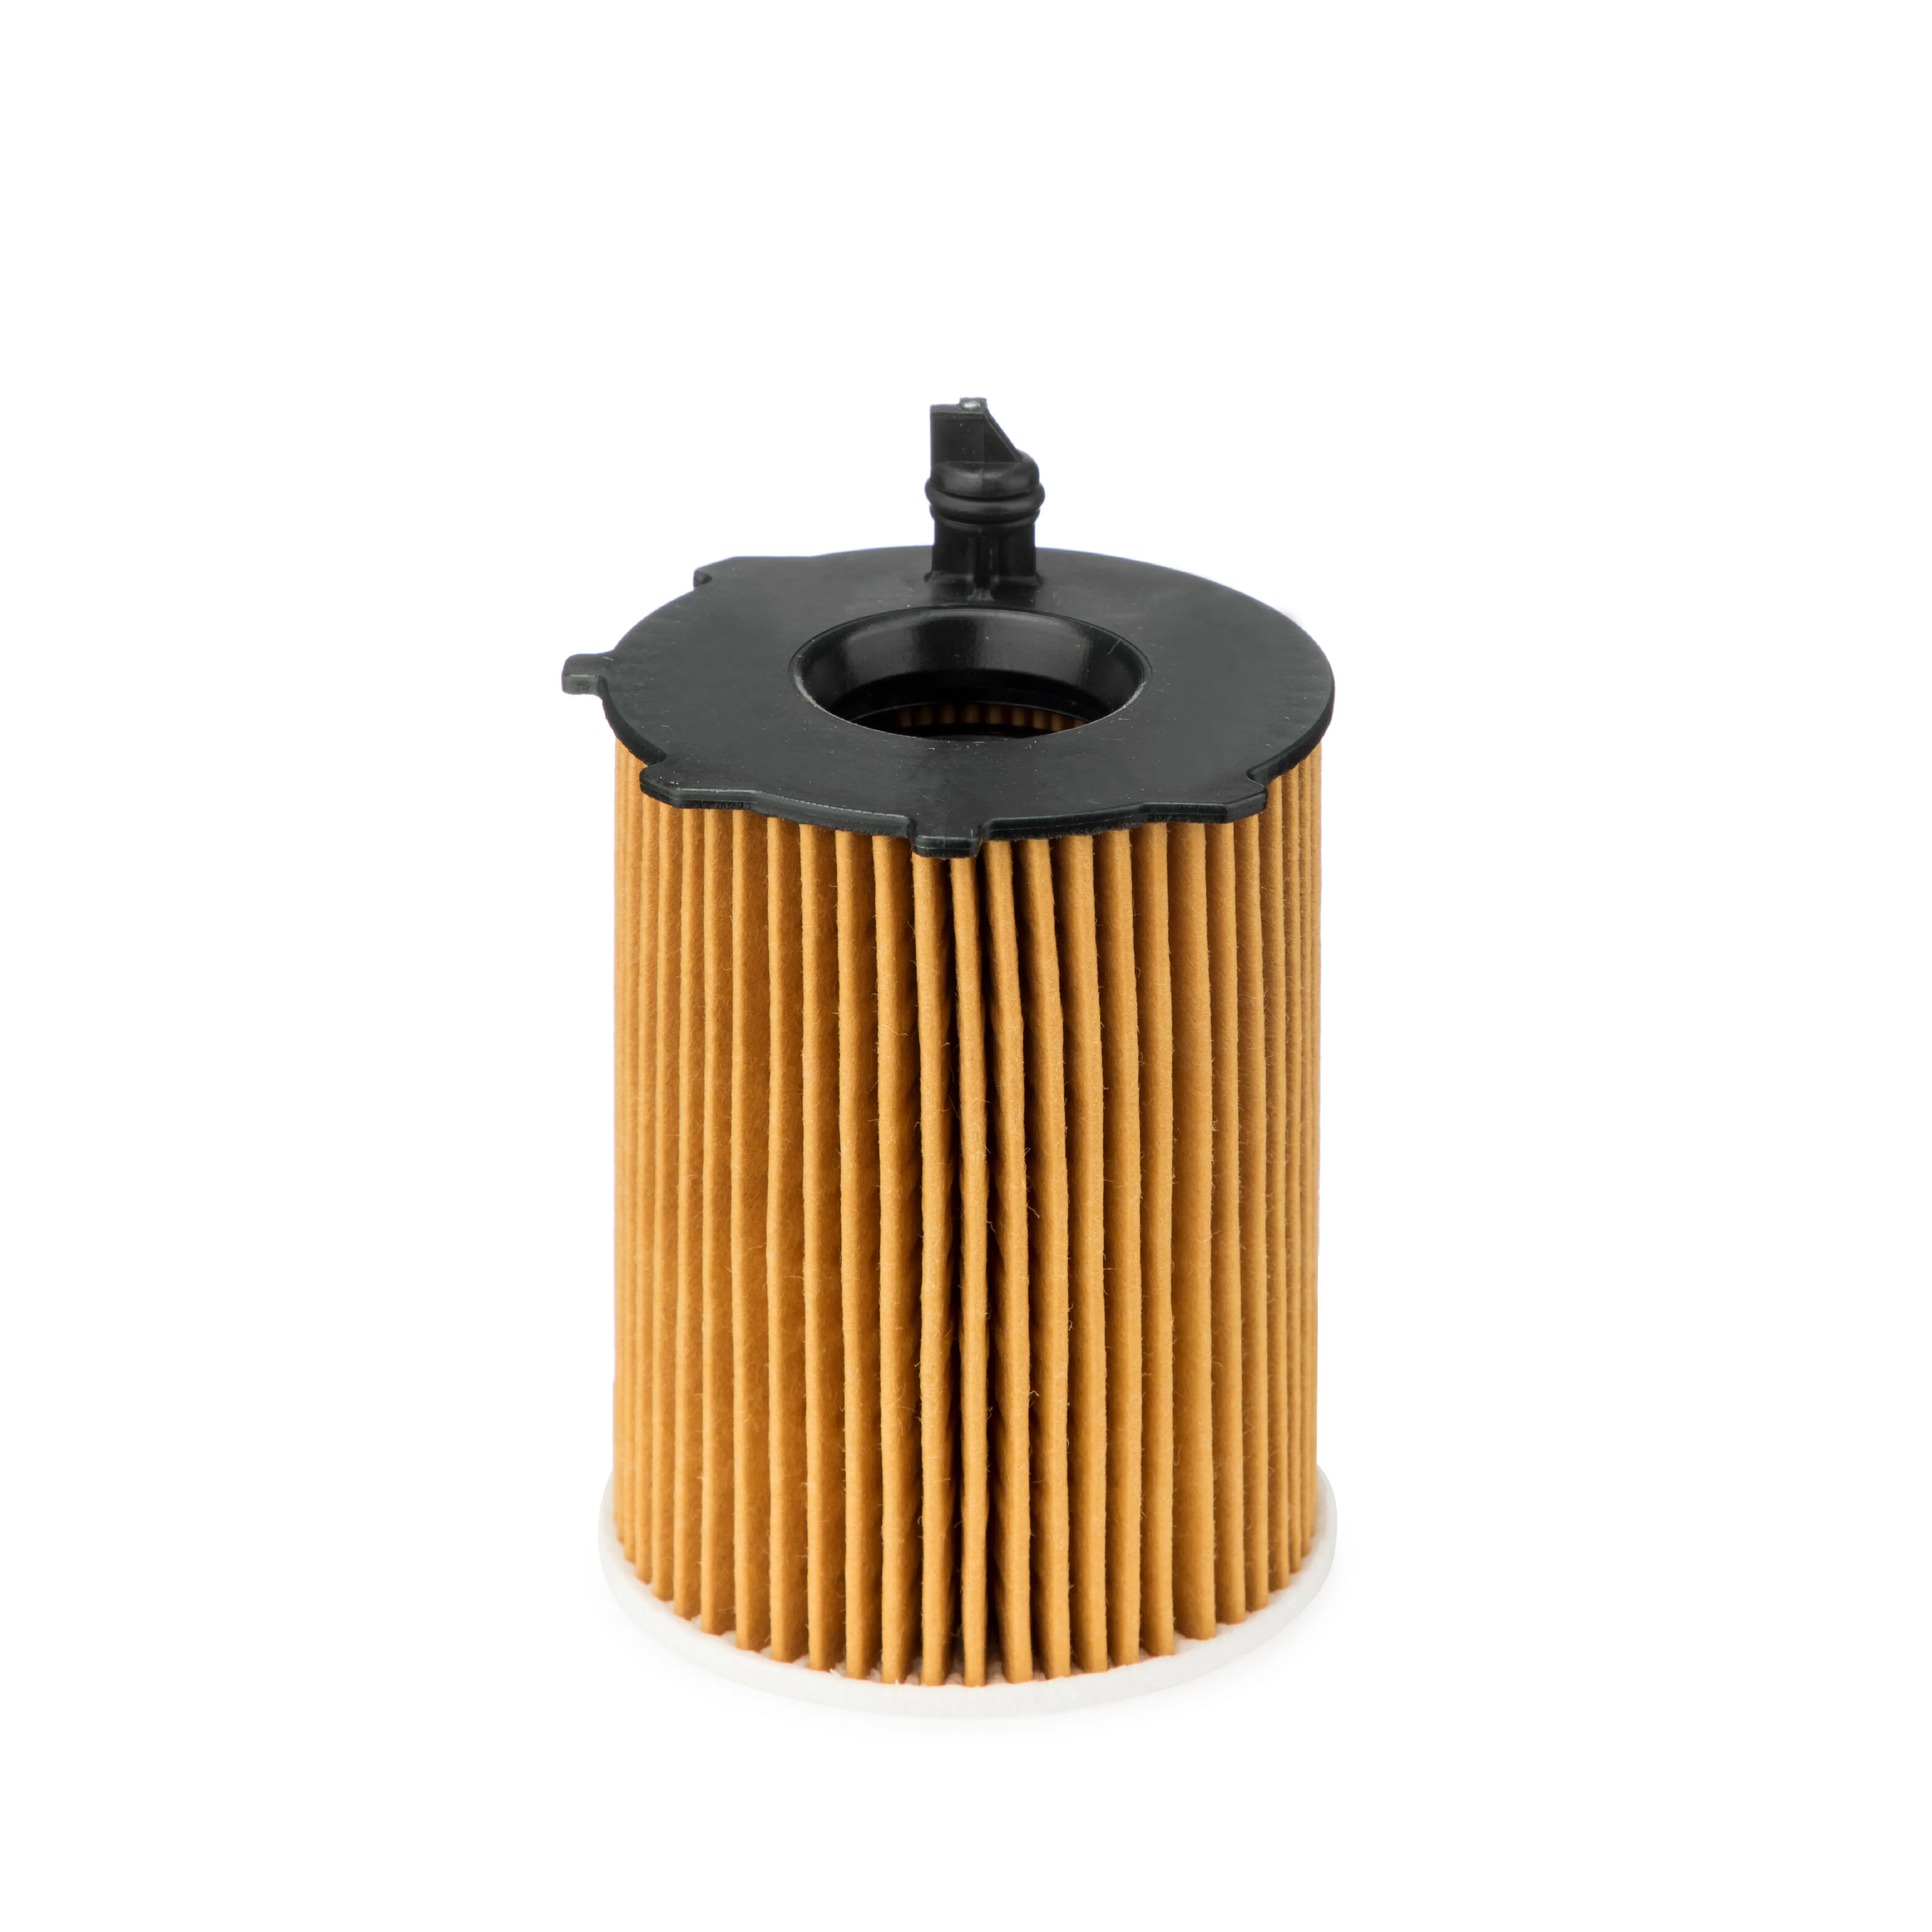 Precision Crafted UFI Filters Engine Oil Filter - Maintain Engine Integrity & Performance 25.037.00 - For the Love of Your Car